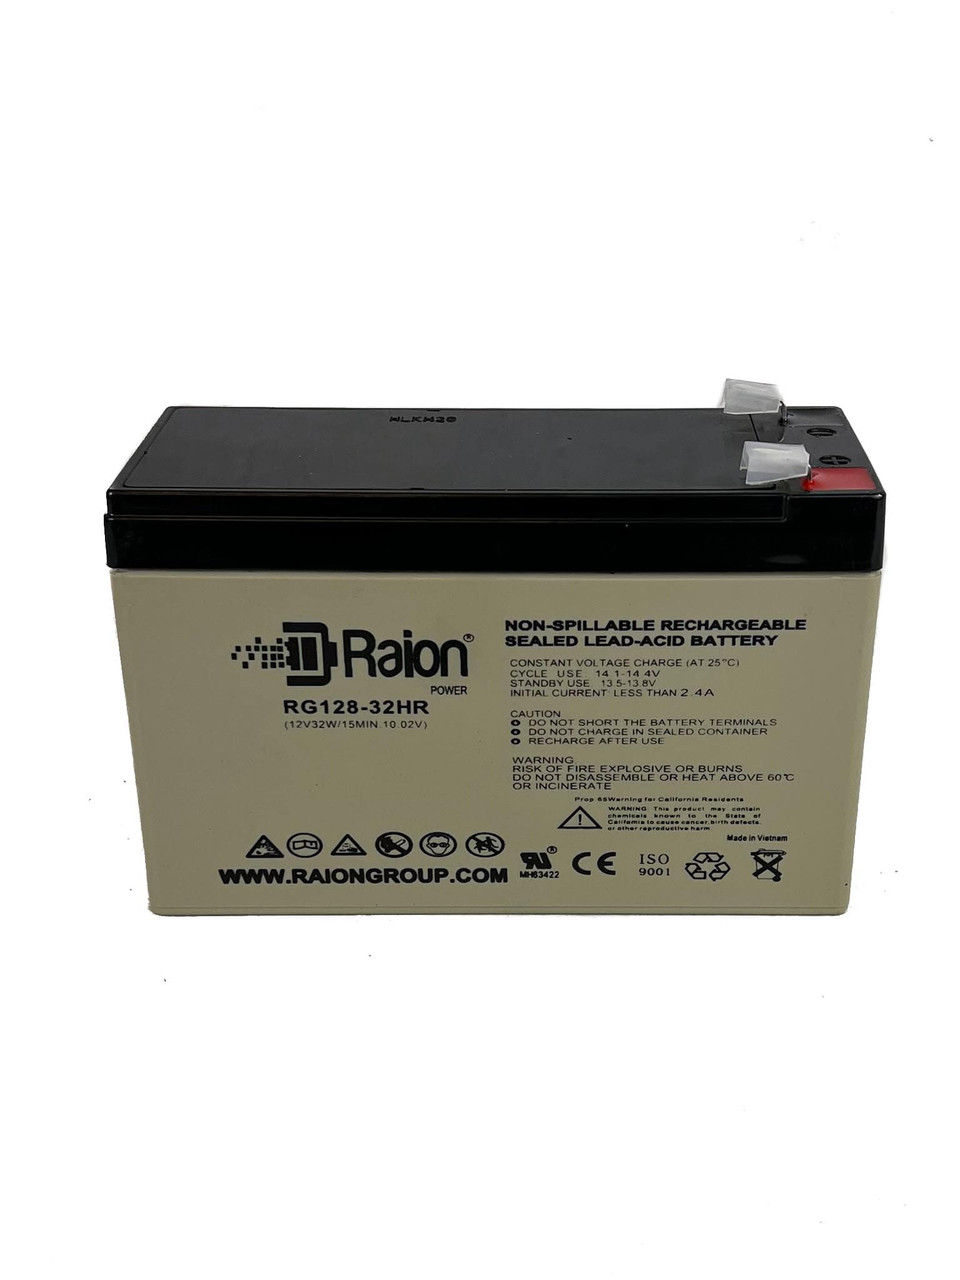 Raion Power RG128-32HR Replacement High Rate Battery Cartridge for ONEAC ONe200A-SB (Single Battery Model)